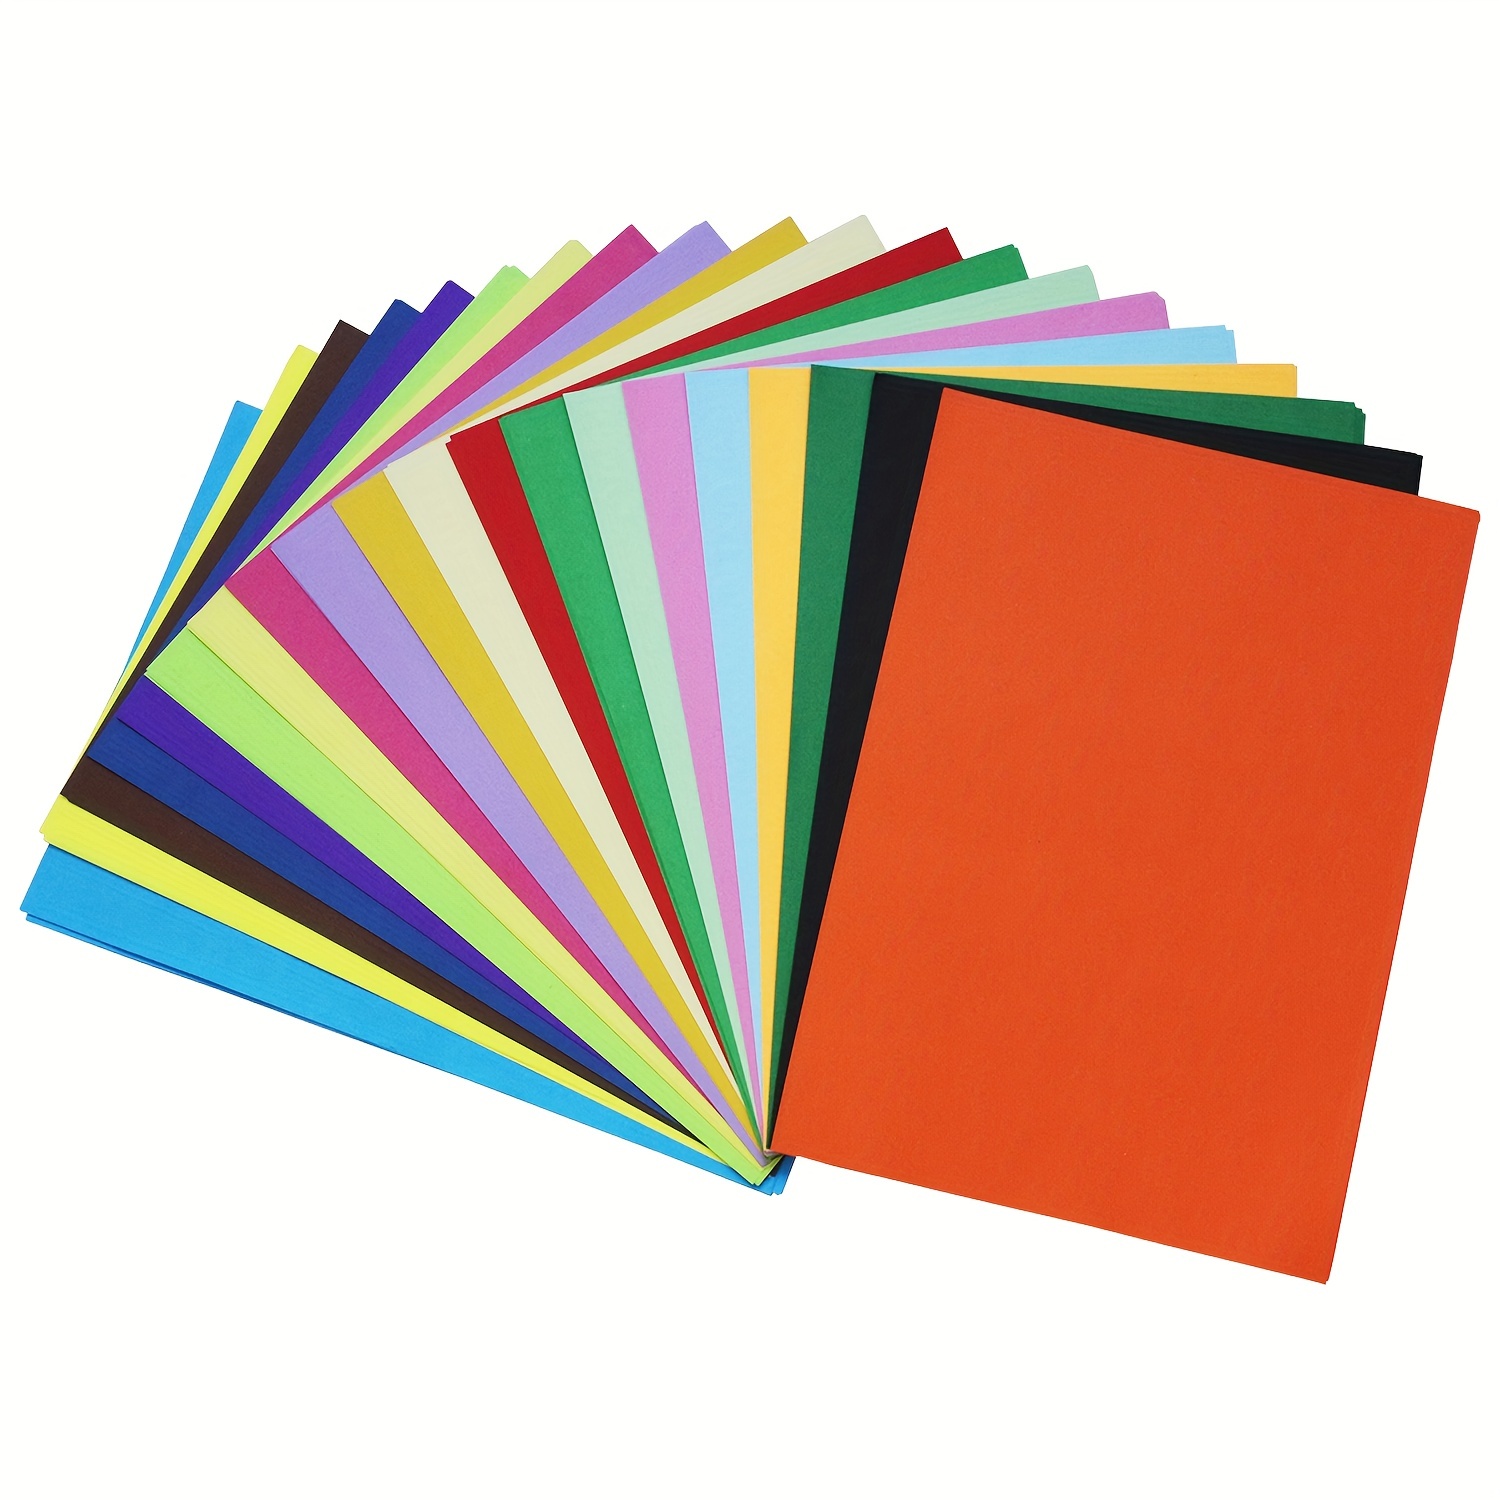 10 Colors Colored Paper A4 Printer Paper Copy Paper Stationery